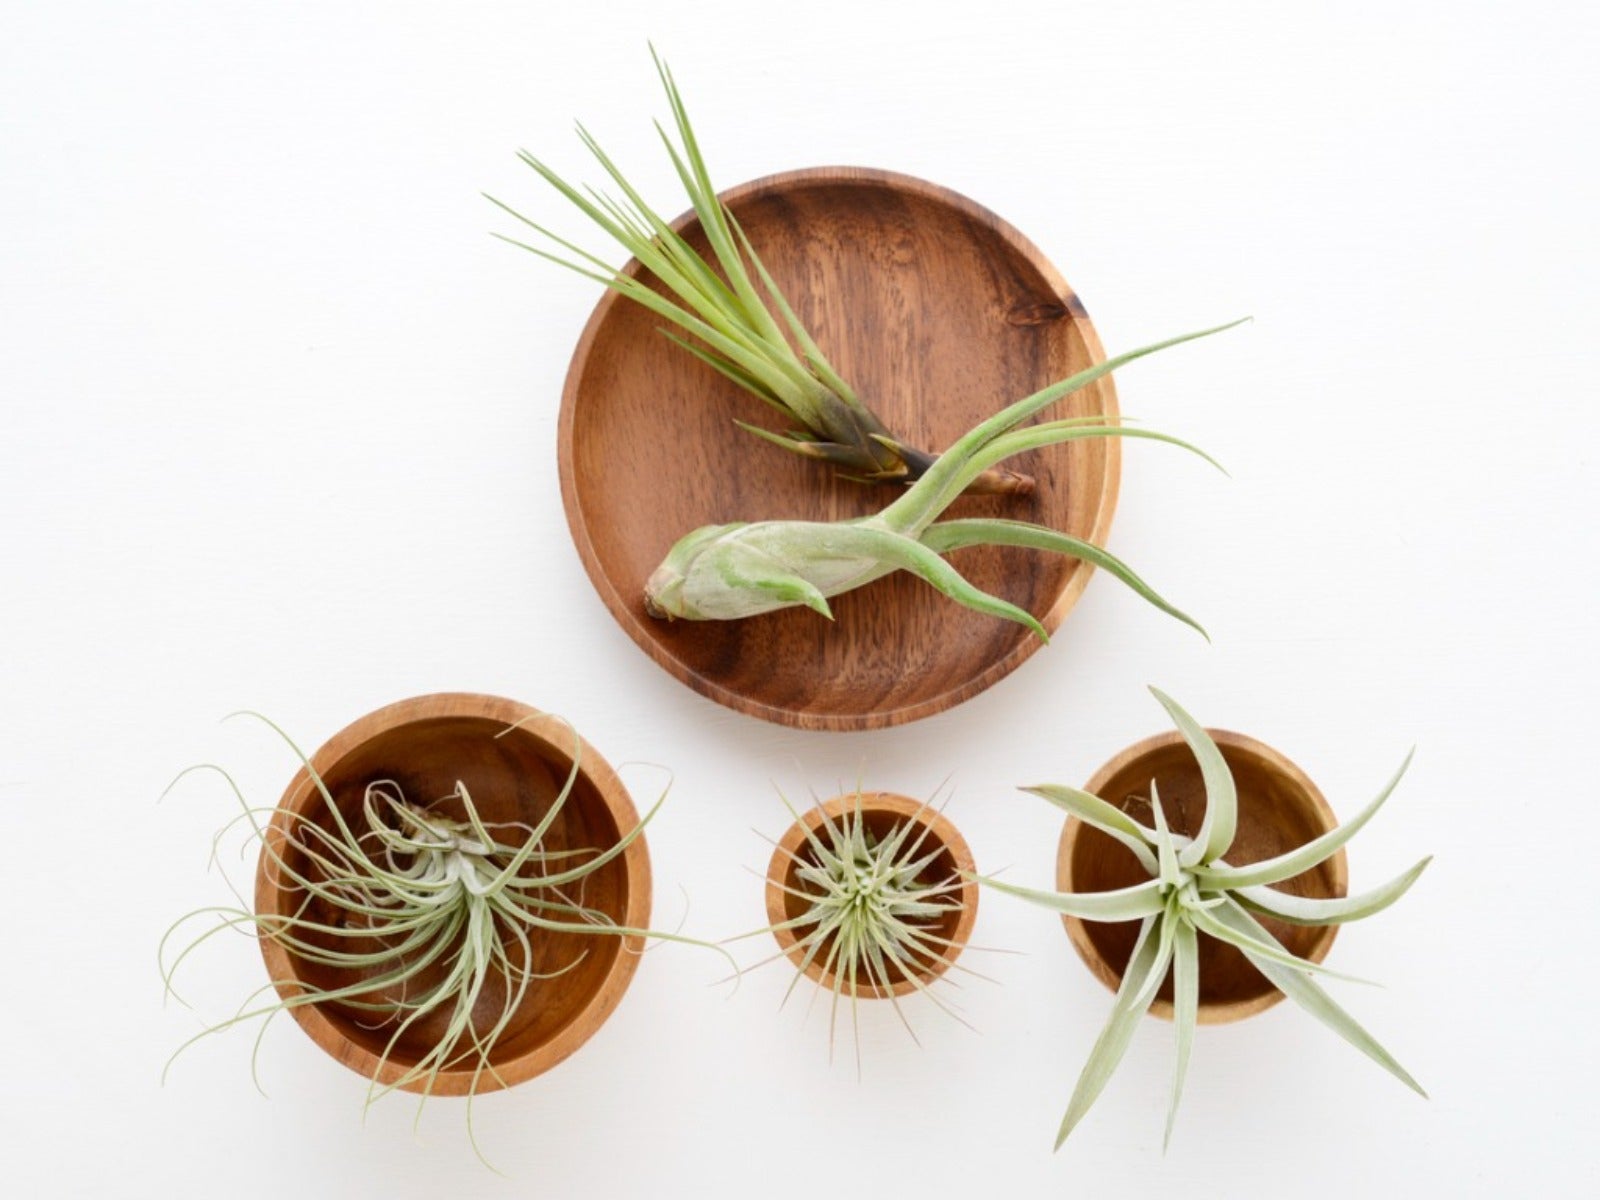 Overhead view of several air plants in wooden dishes